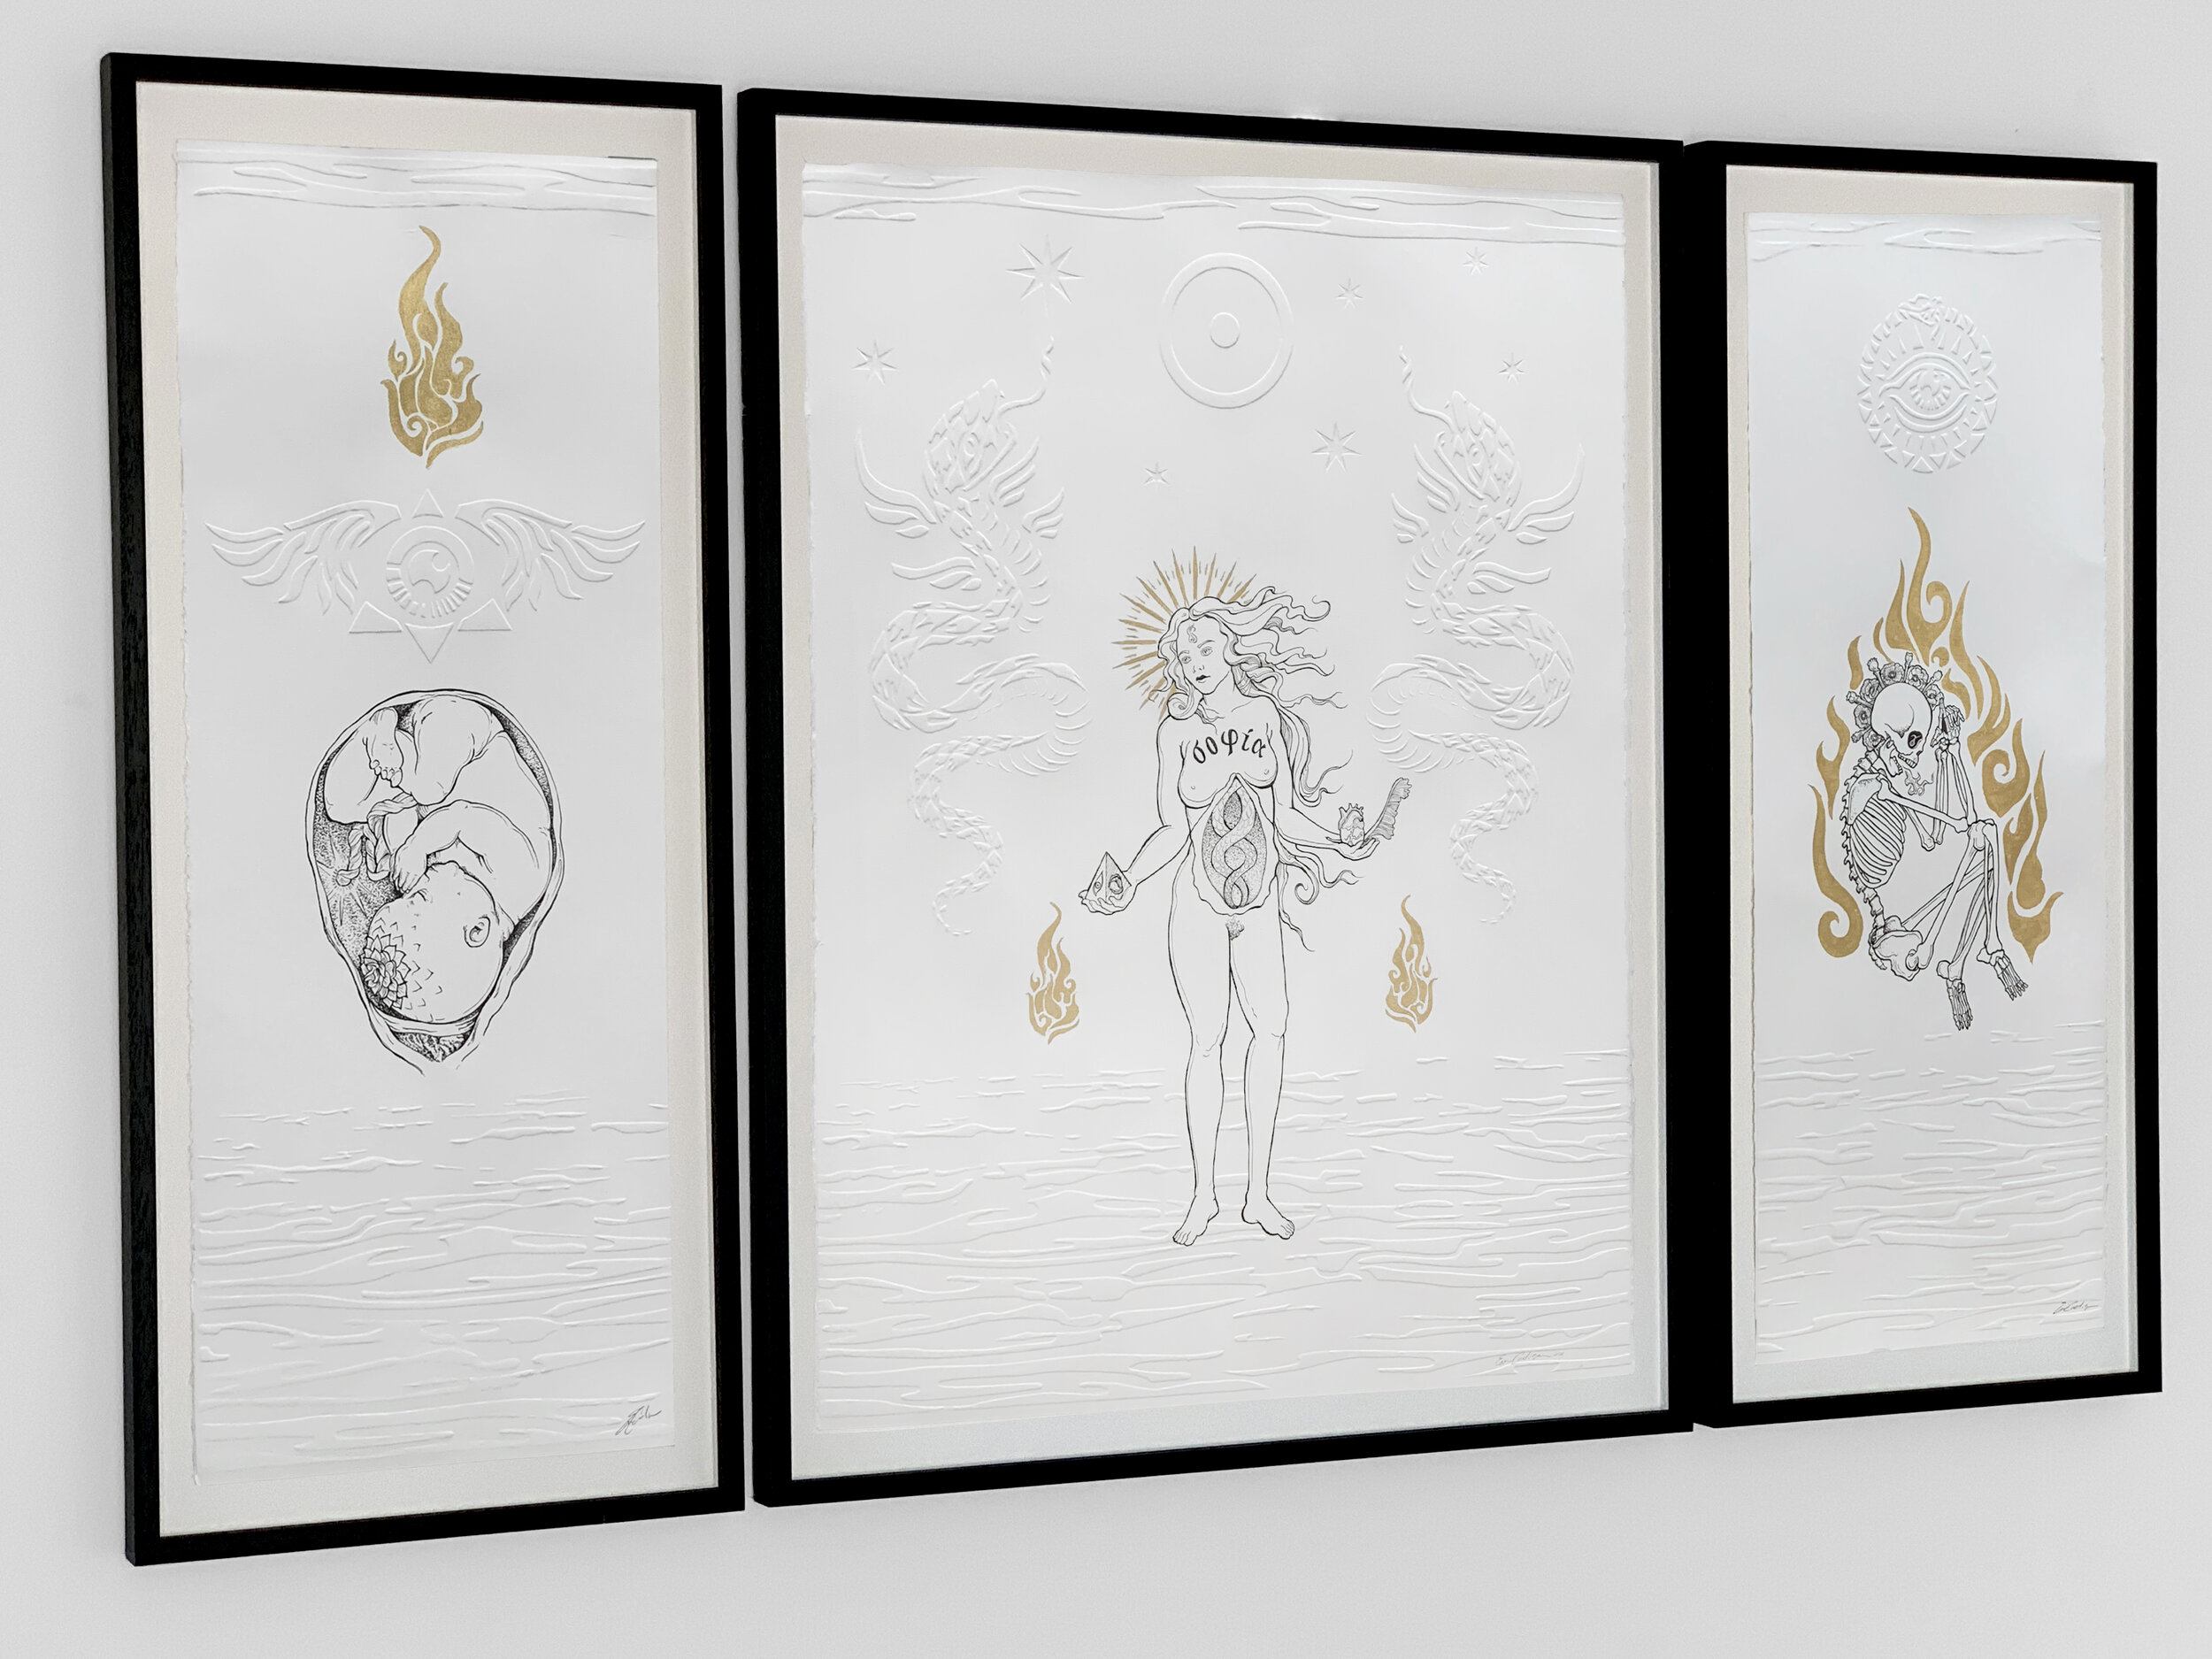   Erin Cadigan.   As Above, So Below , 2020. Ink, 24kt gold leaf, hand embossing &amp; debossing on paper in 3 parts, framed, 34 x 55 inches overall. 